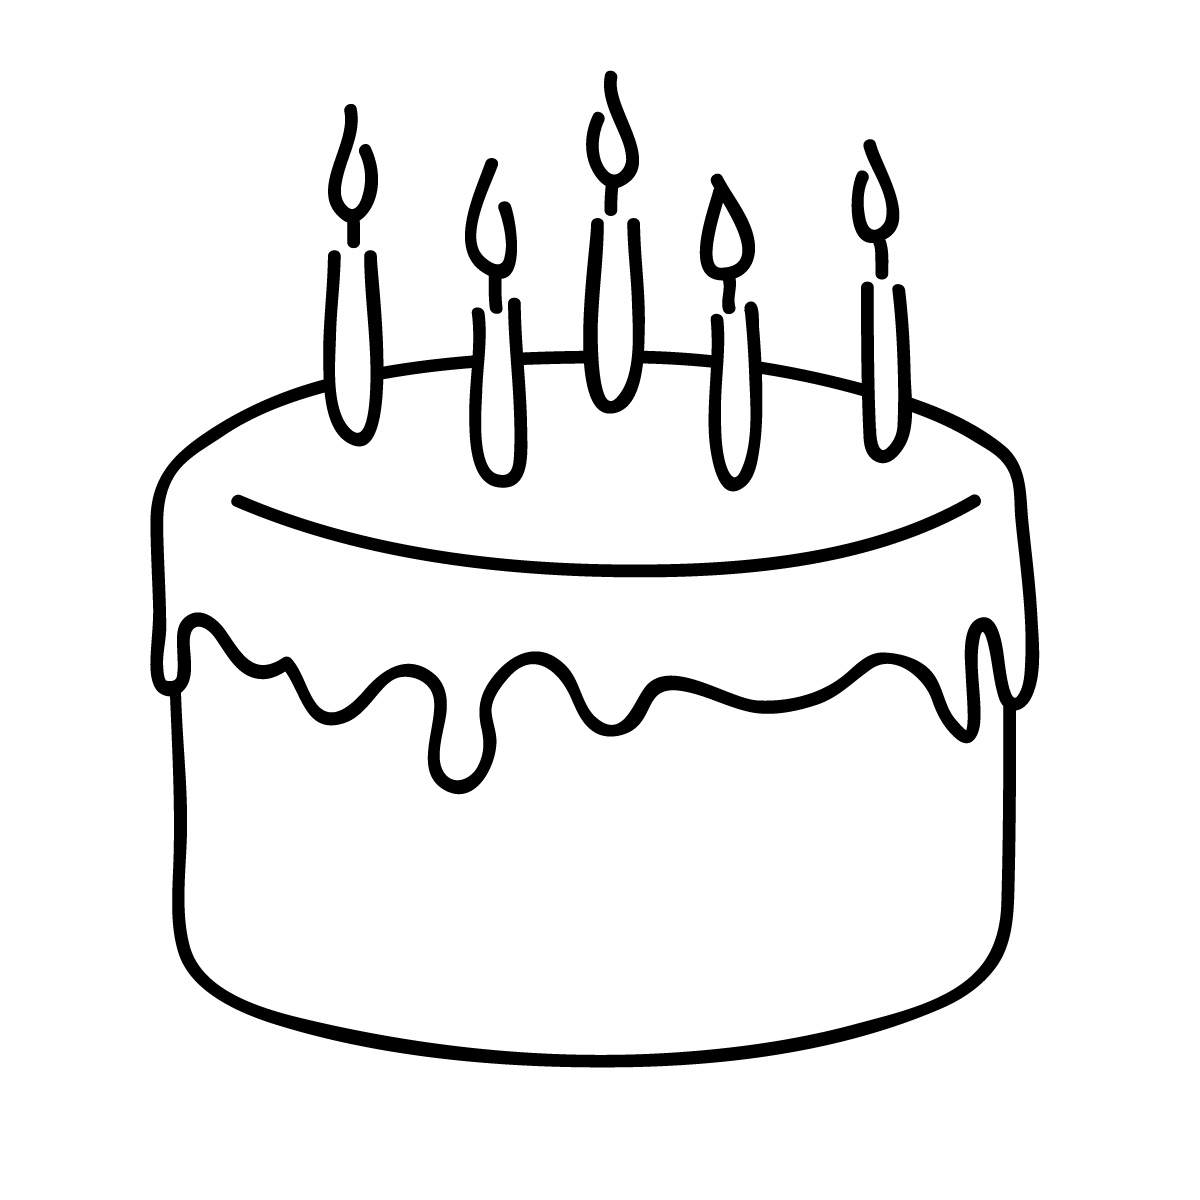 Cake clipart simple.